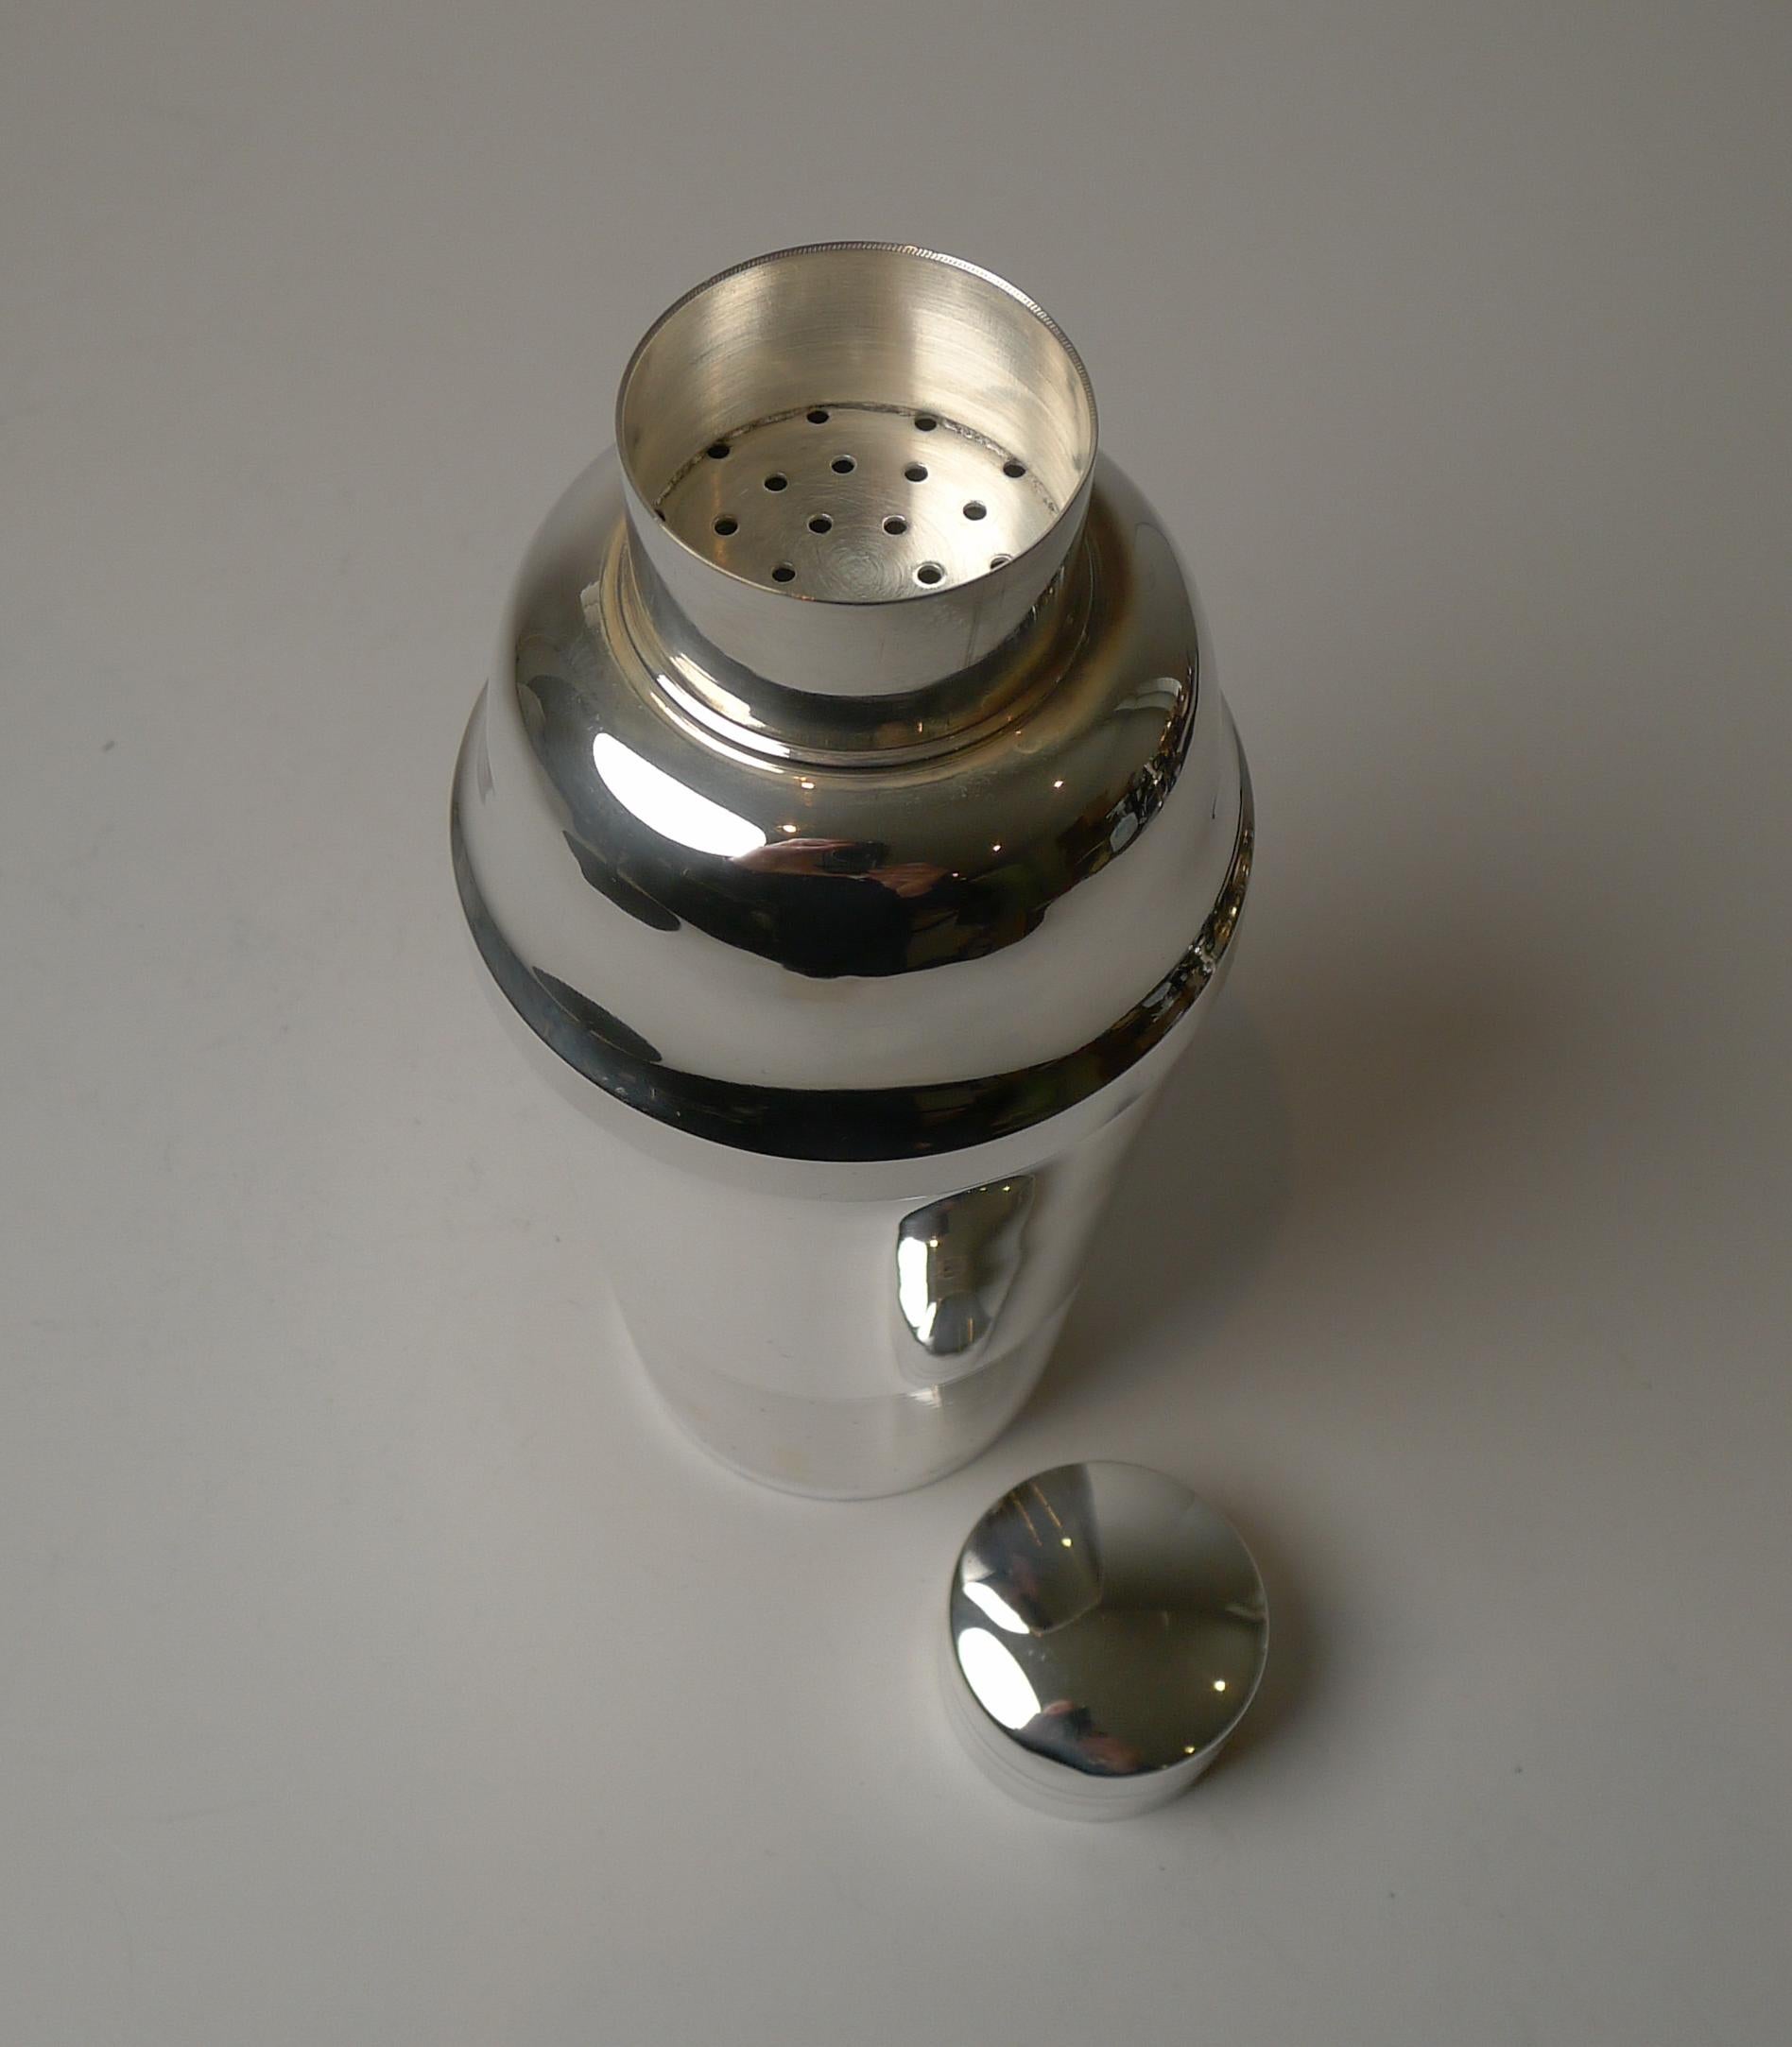 A handsome and unusual Art Deco cocktail shaker in silver plate and dating to c.1930/1940. An unusual design with the lower portion having a linear design with little polka dot engravings, a lovely decorative detail.

The underside is fully marked